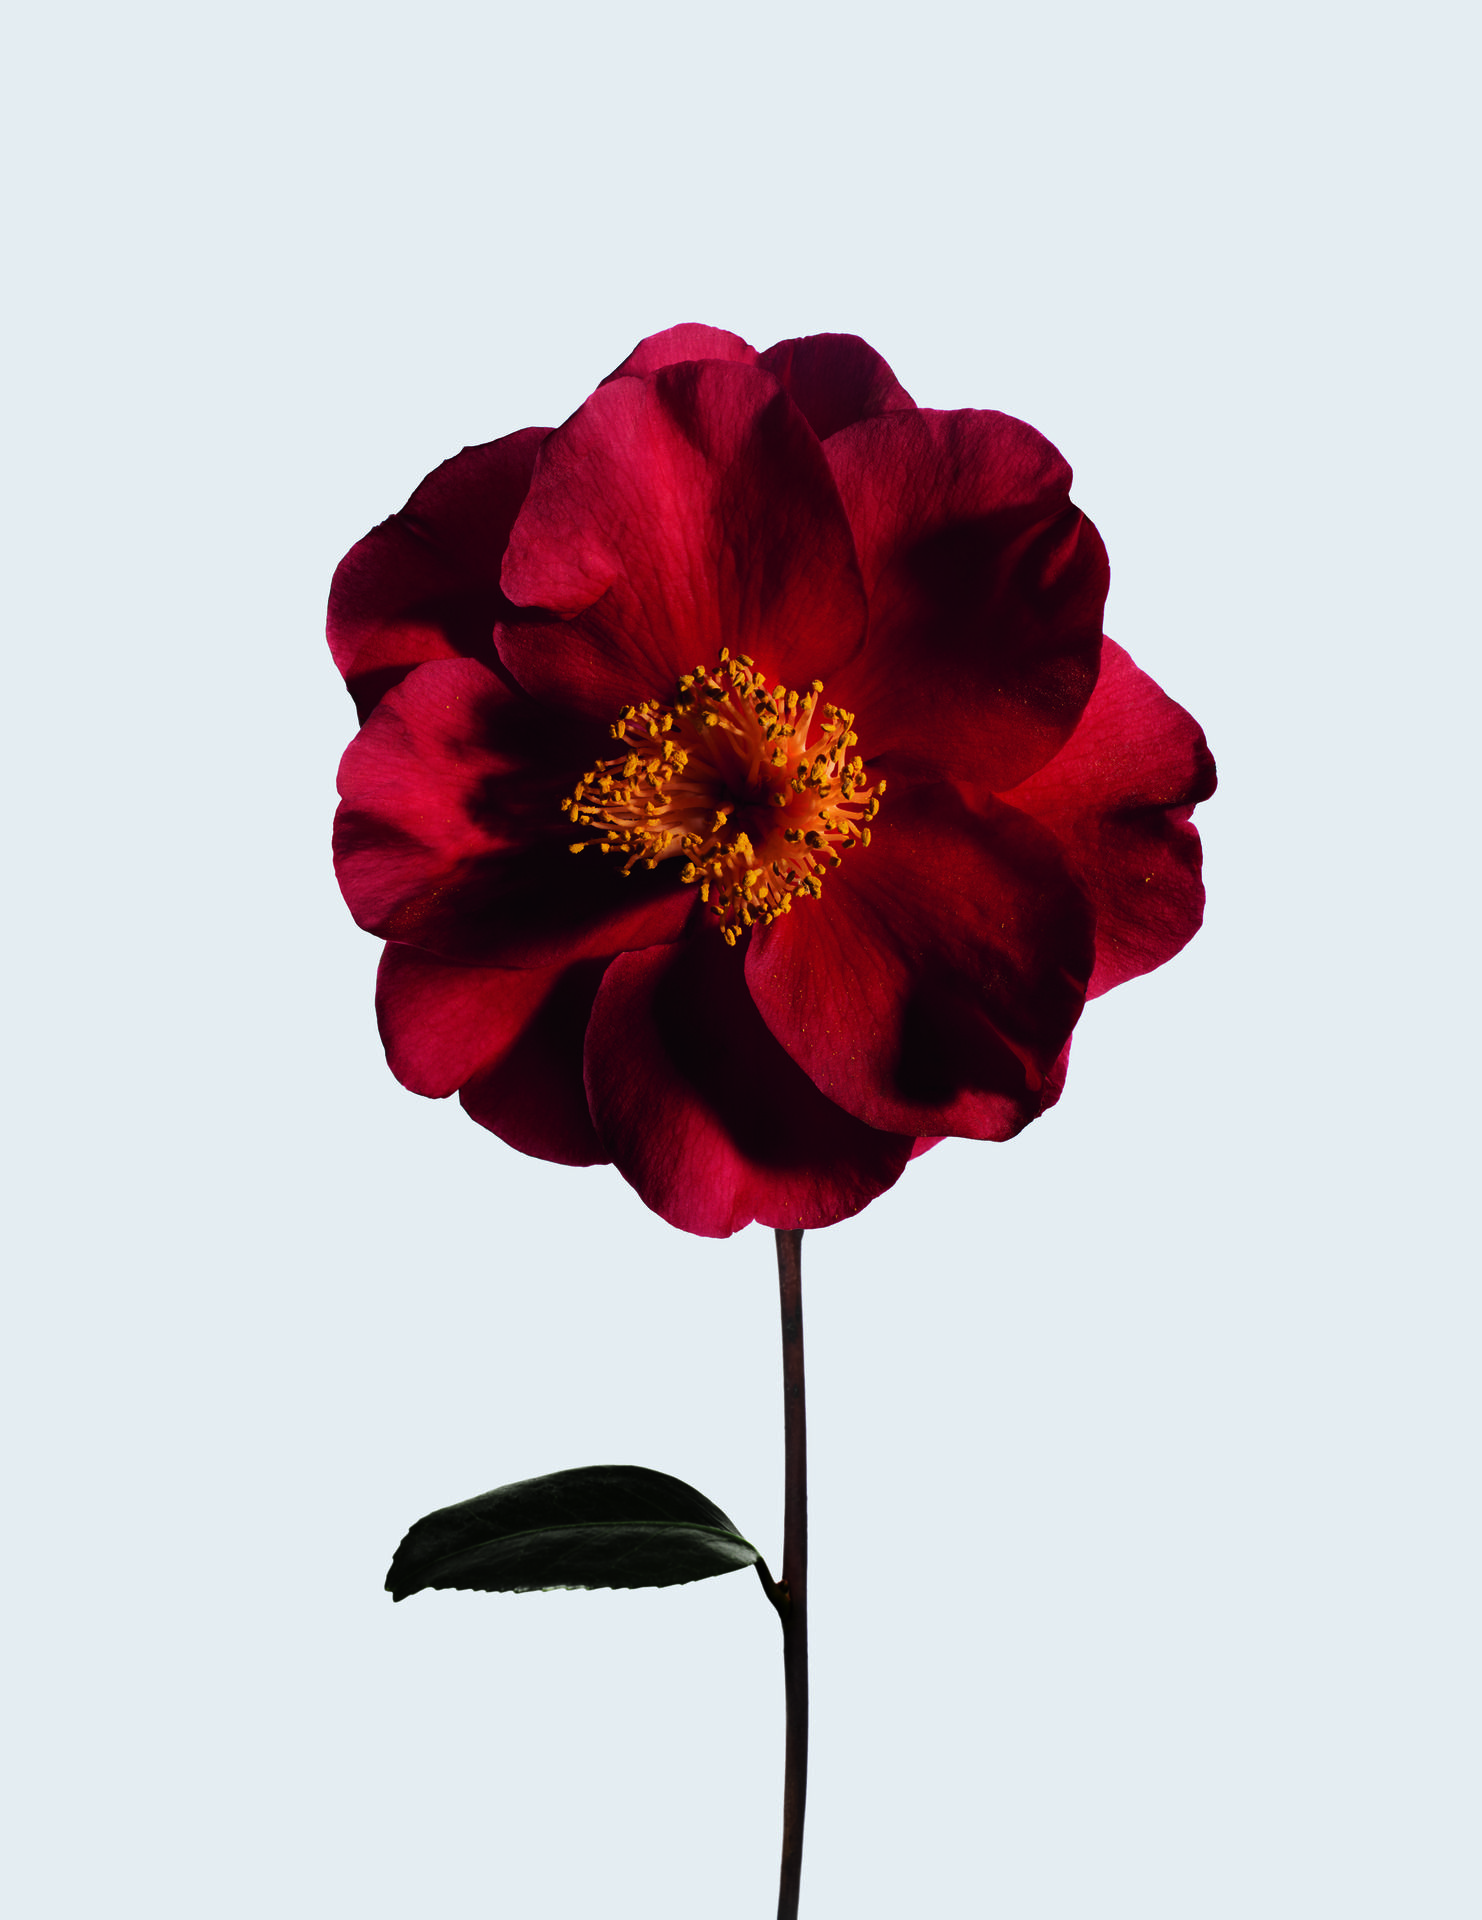 No.1 de Chanel: The New Eco-Responsible, Red Camellia-Centric Beauty Line  That Took 10 Years To Make